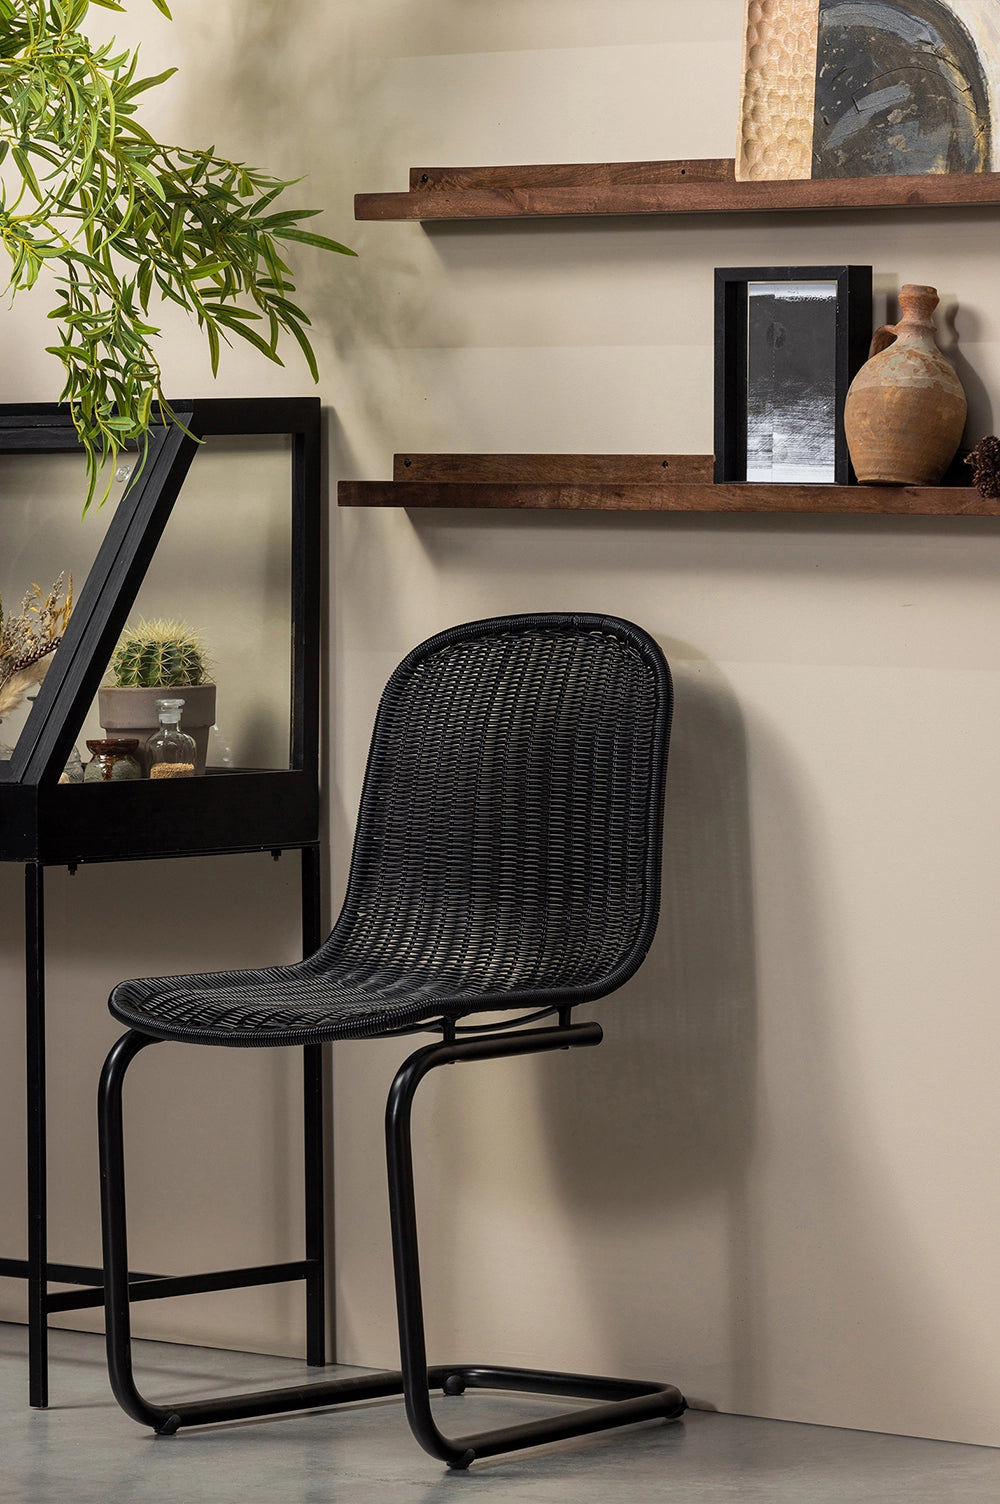 Elm Dining Chair - Black 7 with - Black Display Cabinet and Brown Wooden Wall Shelf in Living Room Setting